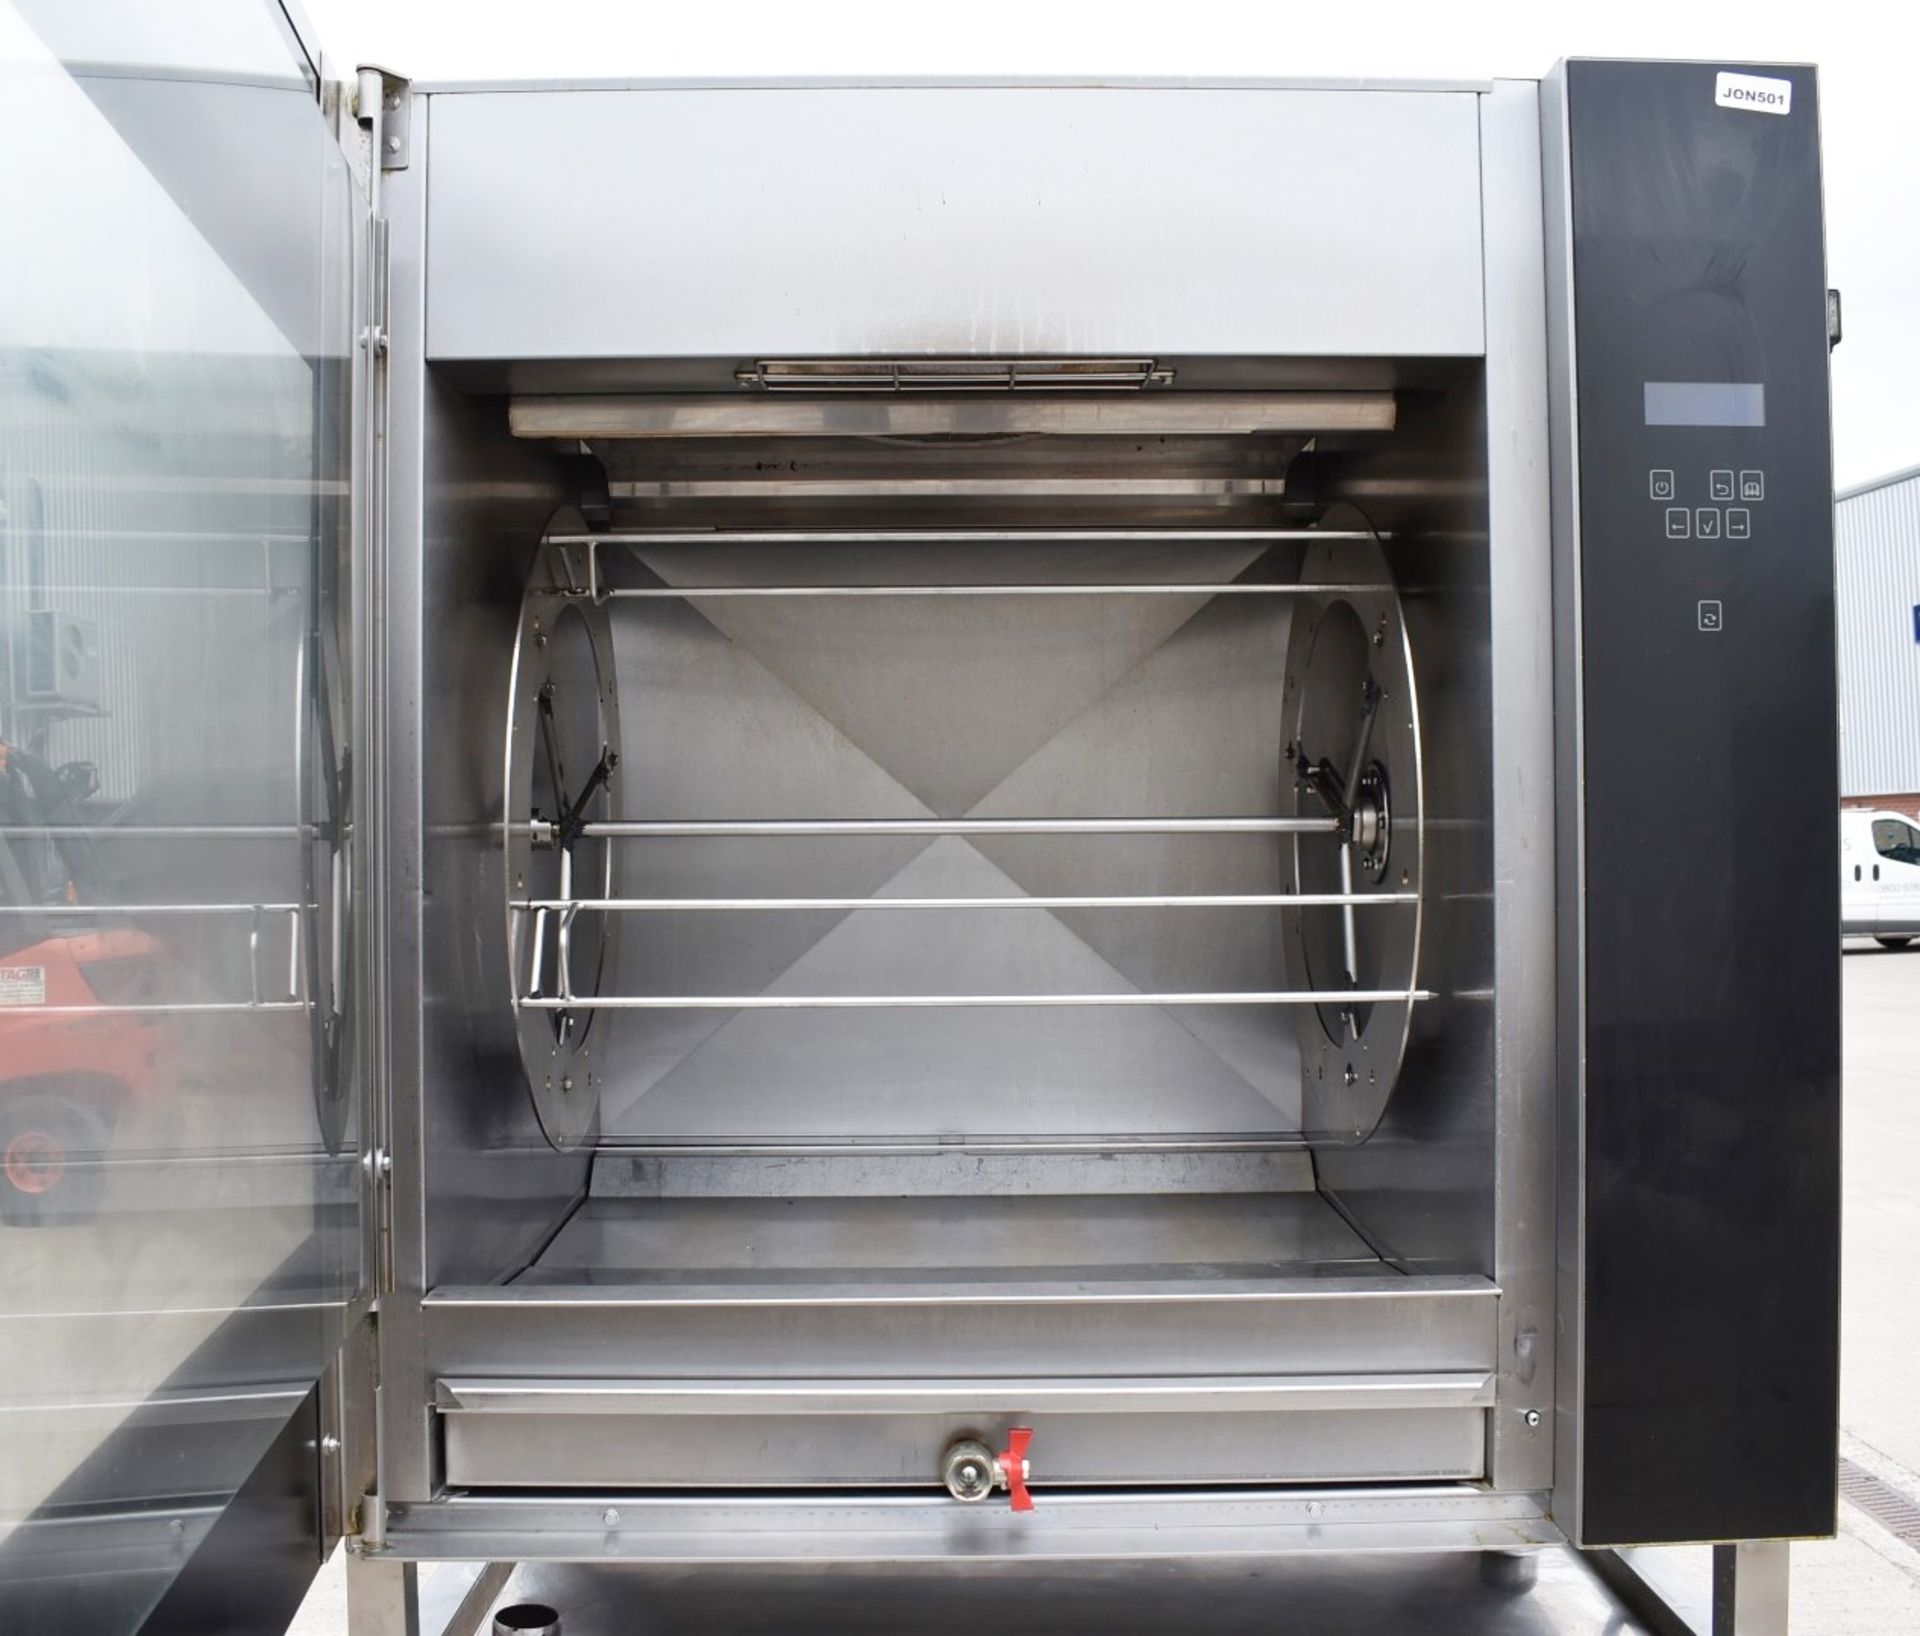 1 x Houno Electric Combi Oven and Fri-jado Rotisserie Oven Combo With Stand - 3 Phase - Image 15 of 22